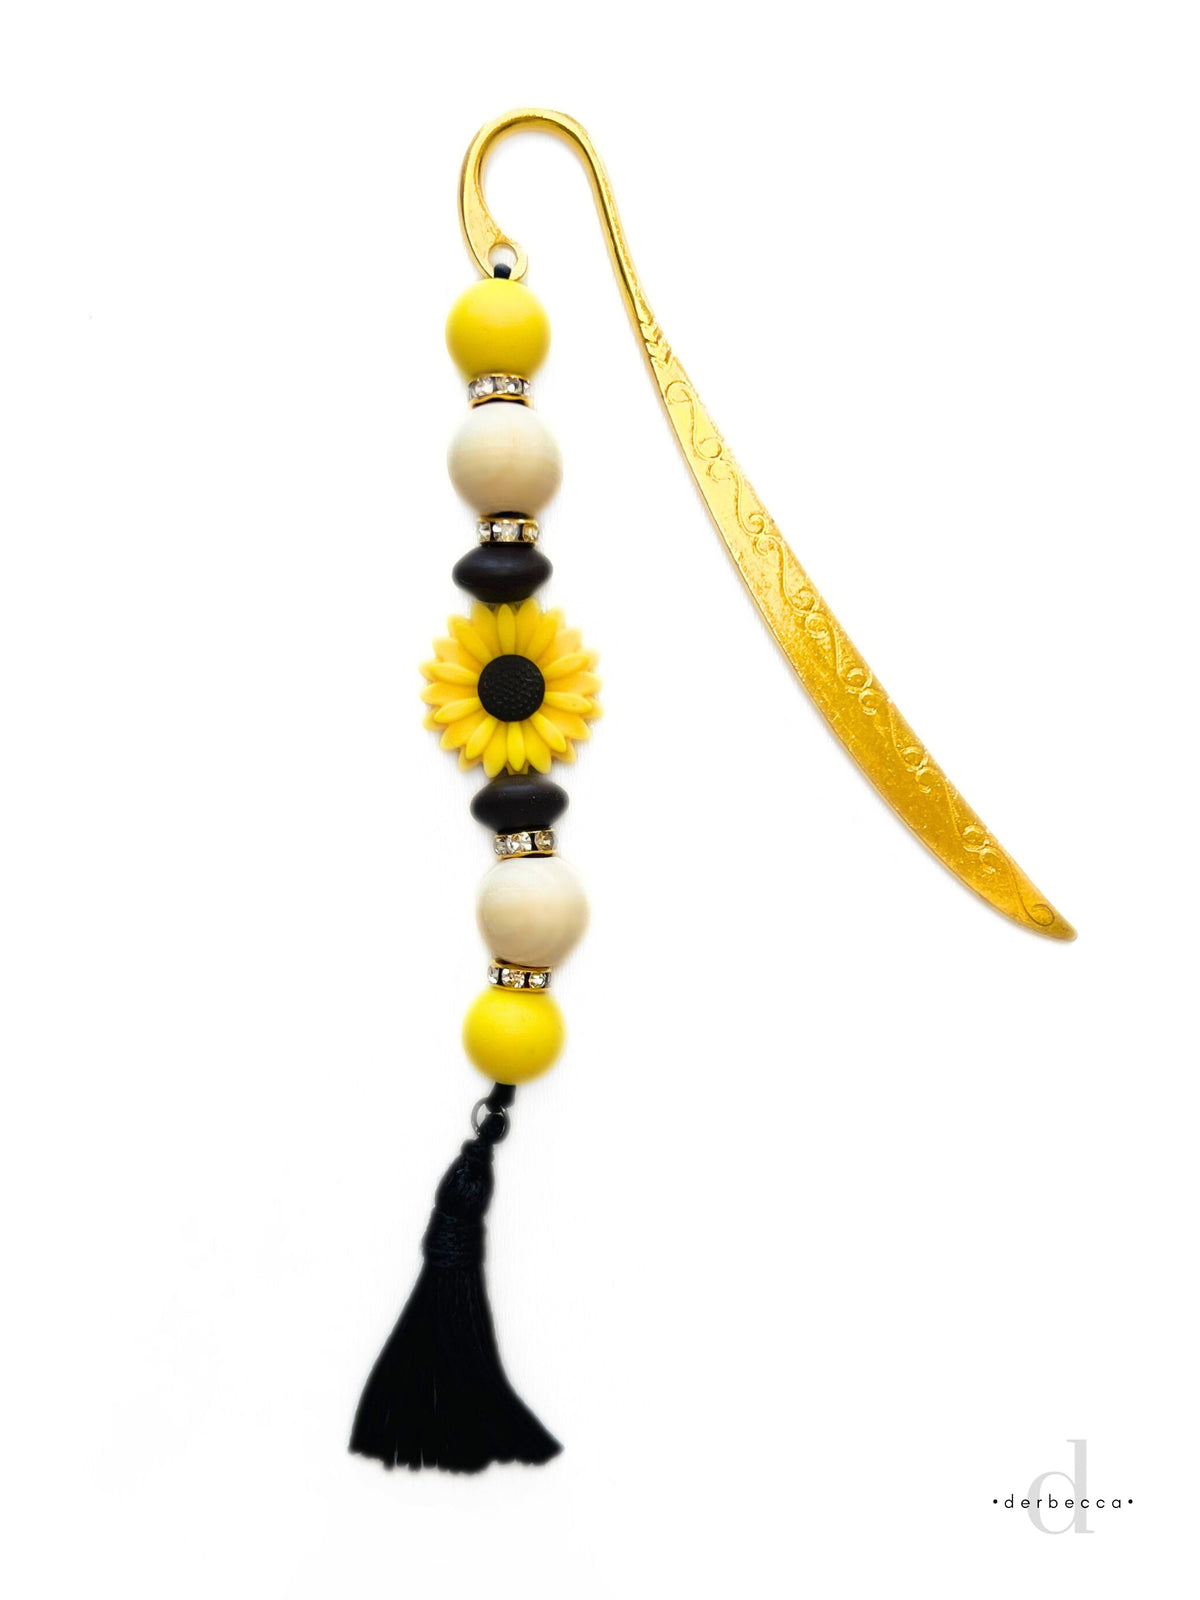 Gold Plated Metal Bookmark with a Sunflower Daisy Focal Bead, Brown Lentil Beads, Wood Beads, and Yellow 15mm Silicone Accent Beads finished with a Dark Brown faux silk Drop Tassel